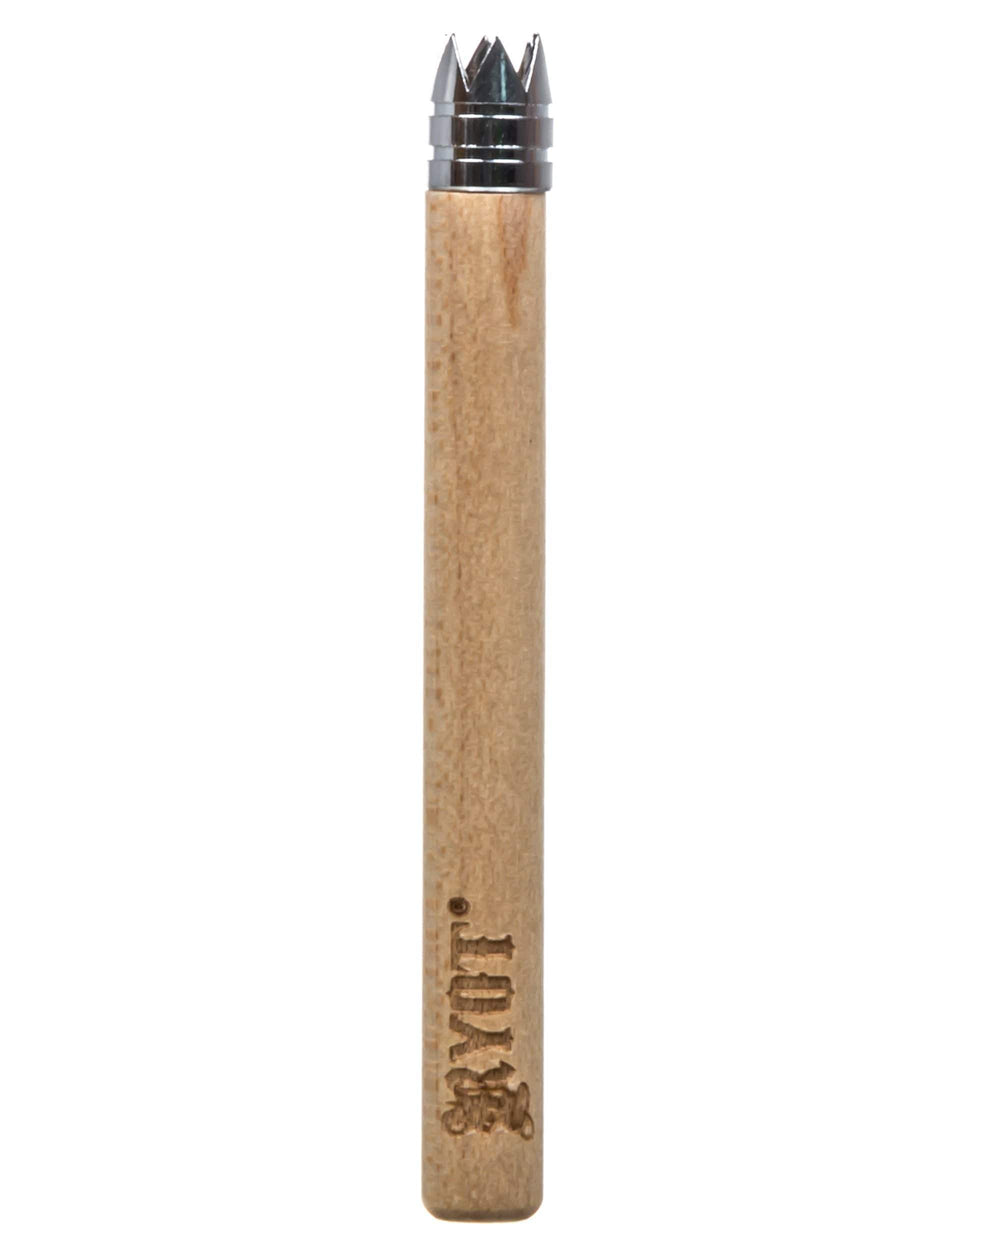 RYOT 420 Accessories Bamboo RYOT Wooden One Hitter w/ Digger Tip RYOT Wooden One Hitter w/tip-Winkler Vape SuperStore & Bong Shop Manitoba